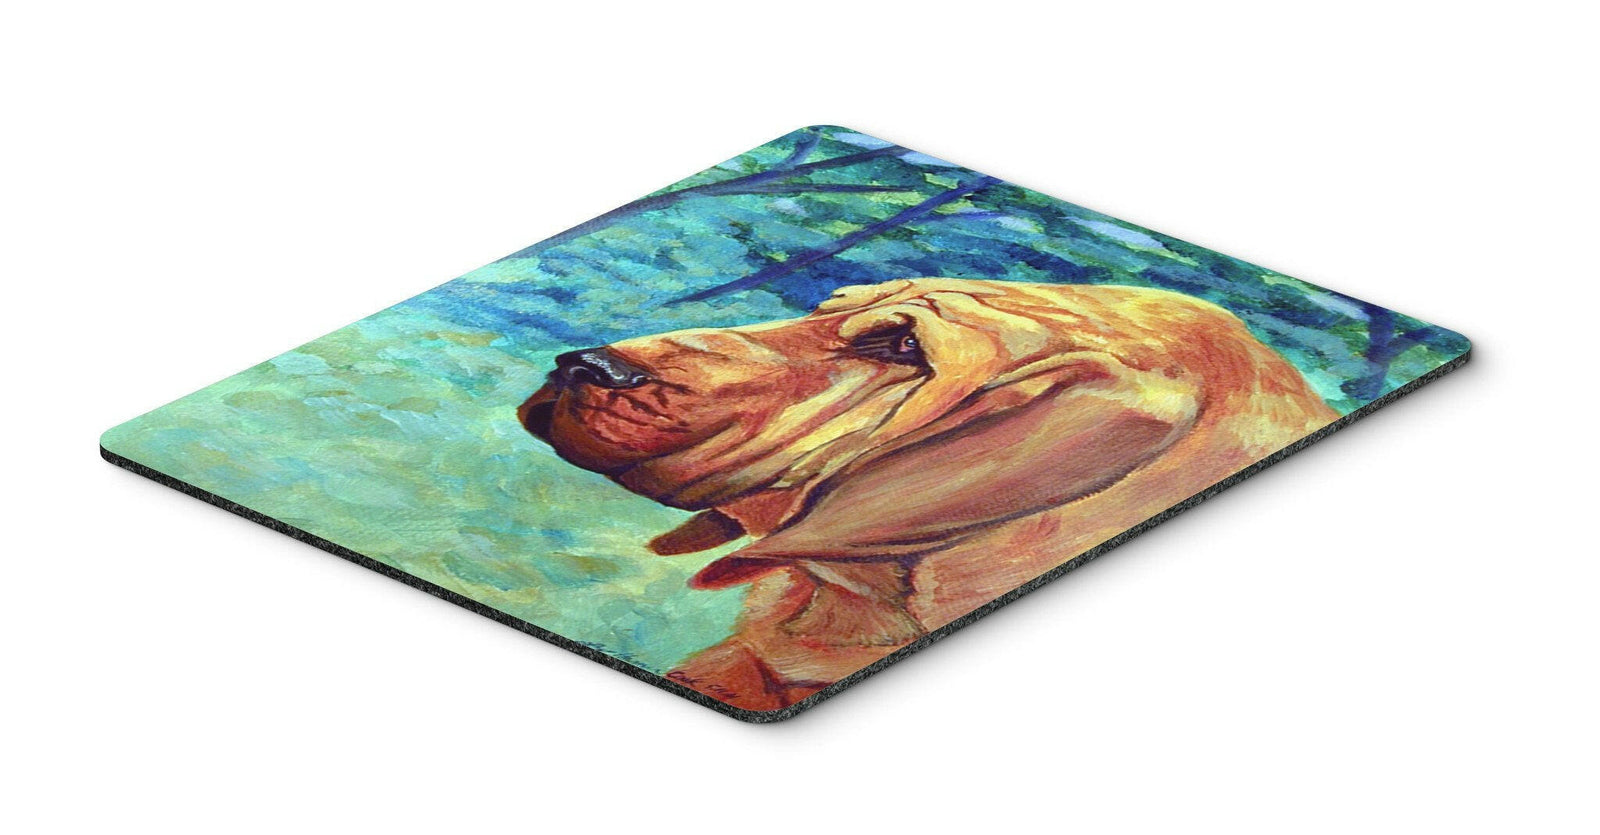 Bloodhound Thoughtful Mouse Pad, Hot Pad or Trivet by Caroline's Treasures